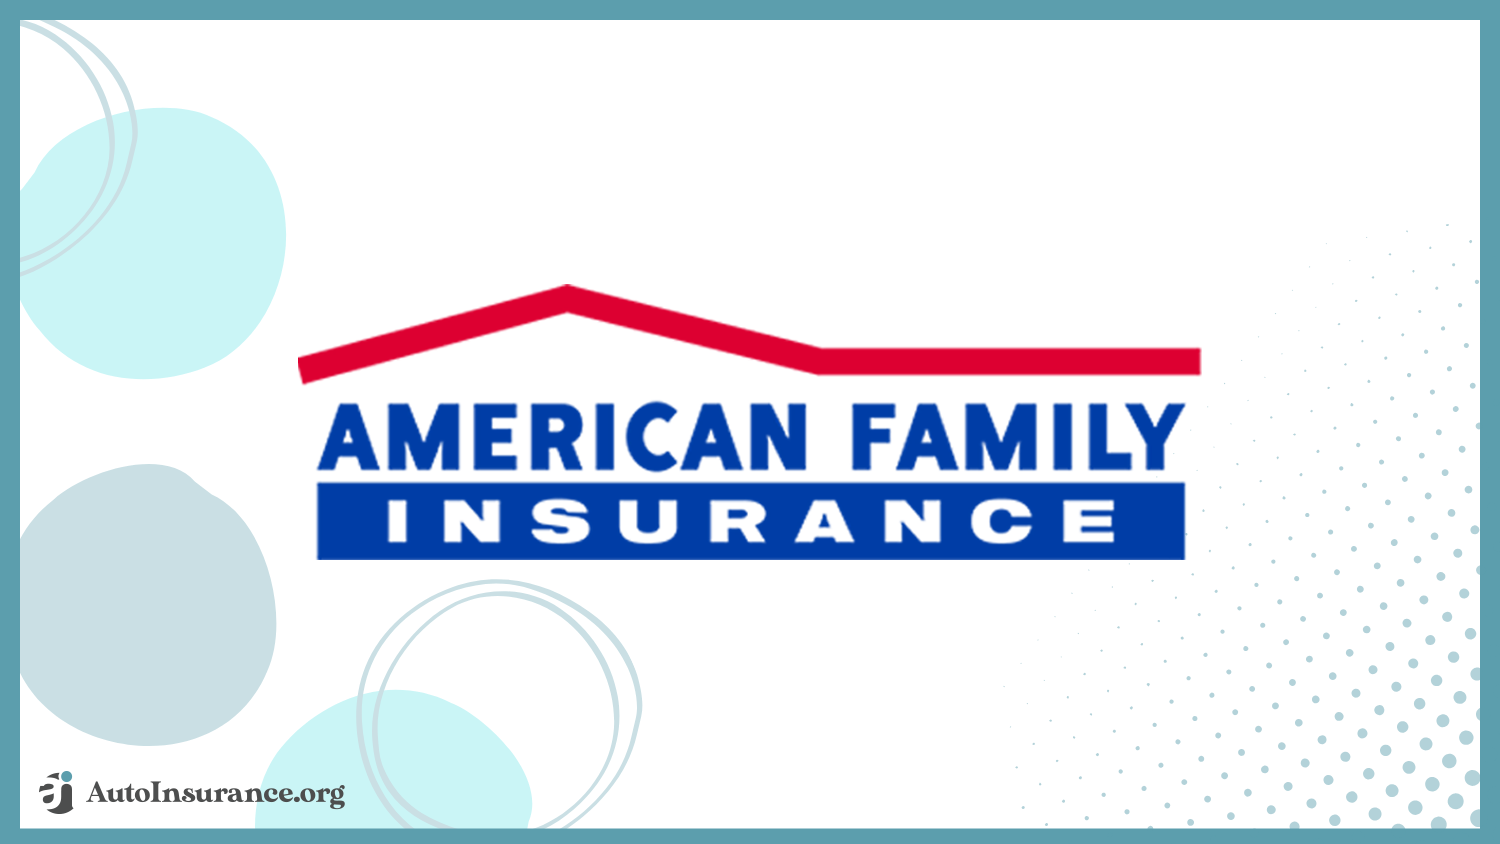 American Family: Best Auto Insurance Companies for High-Risk Drivers